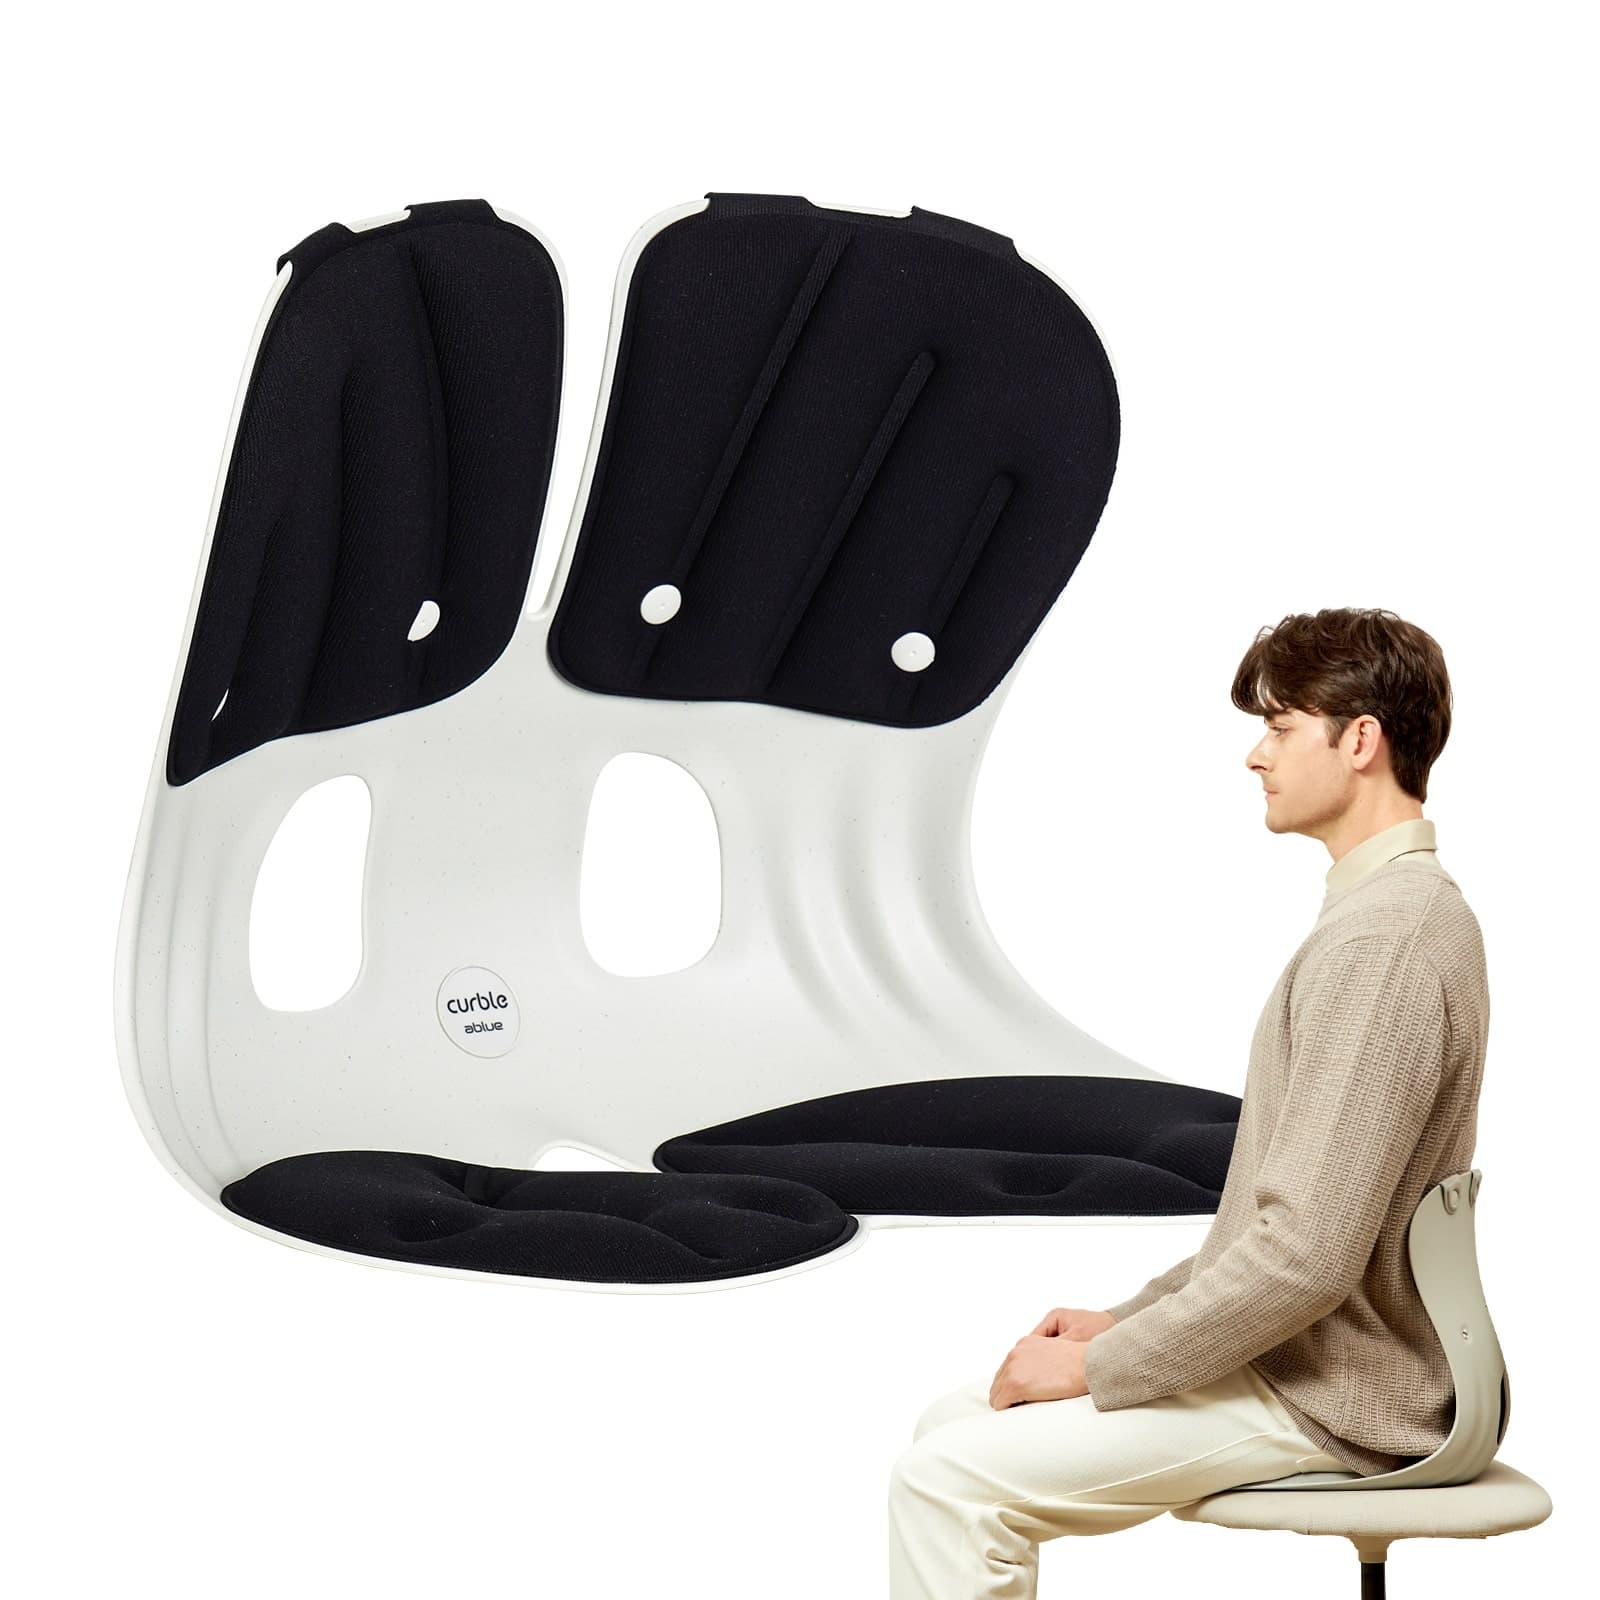 Curble GRAND_ Posture Corrector Back Support_ Ergonomic Designed Lumbar Support for Back Pain Relief